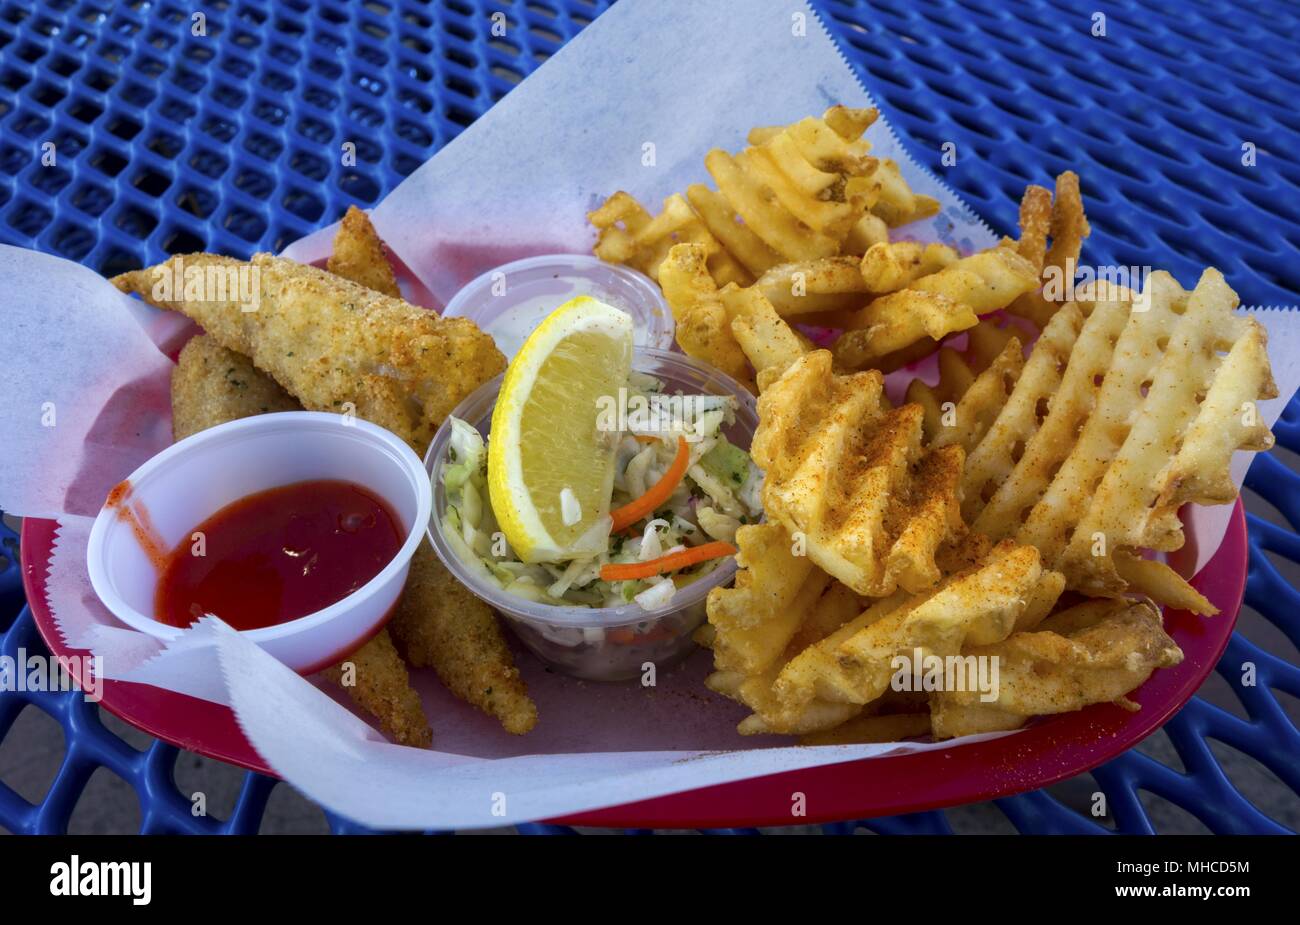 Fish and Chips Dinner Picnic Plate Close Up at Oceanside Pier Outdoors Bistro Restaurant in Southern California Stock Photo